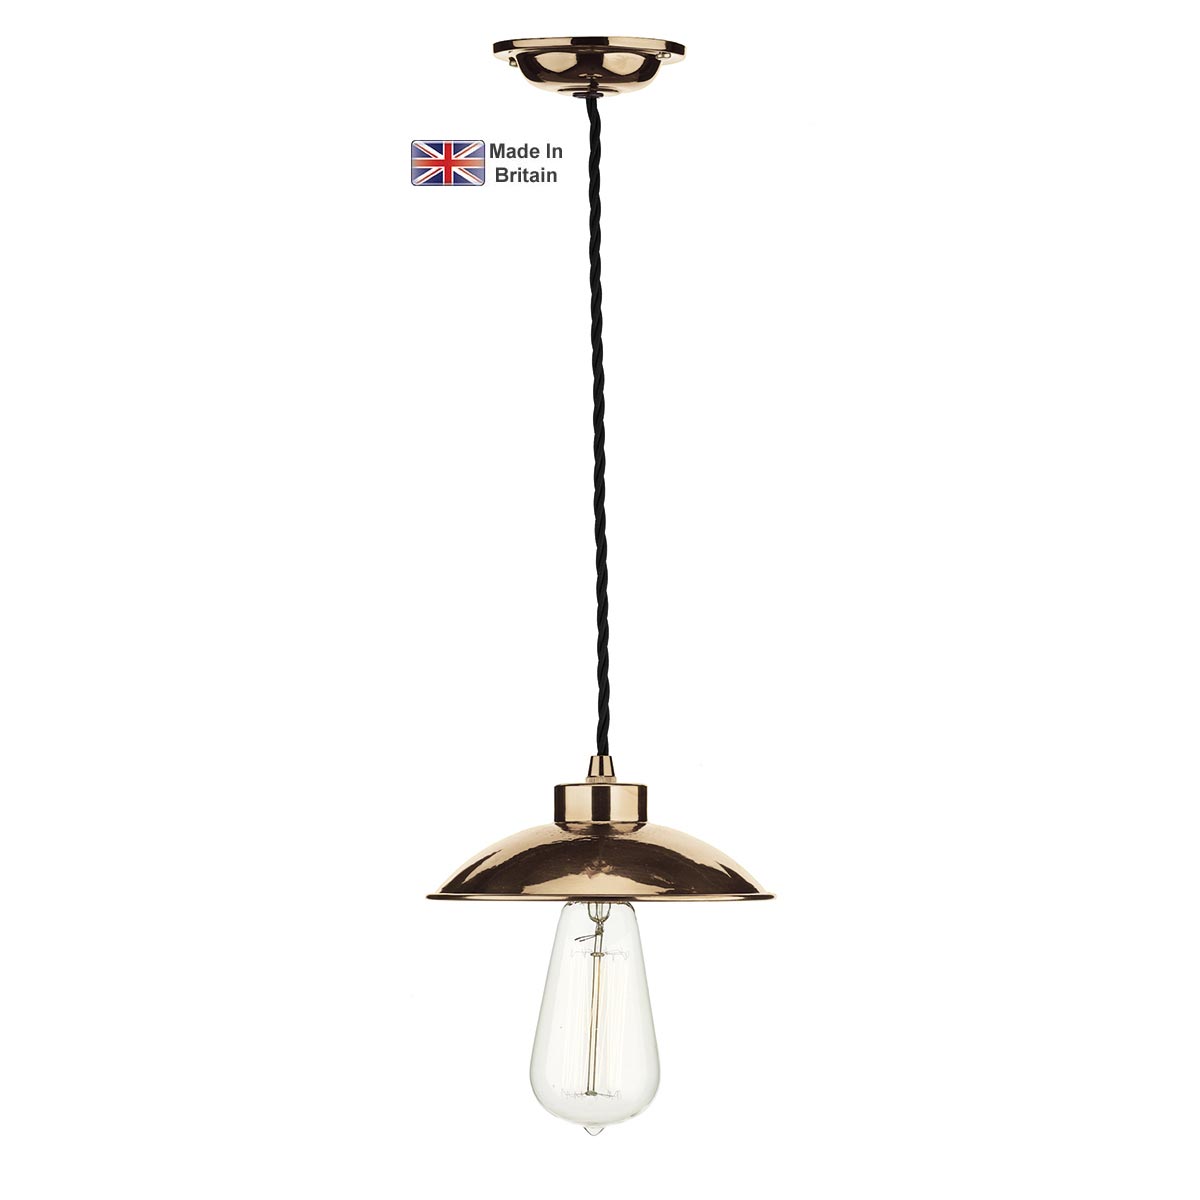 David Hunt Dallas Industrial Style 1 Light Ceiling Pendant Polished Copper